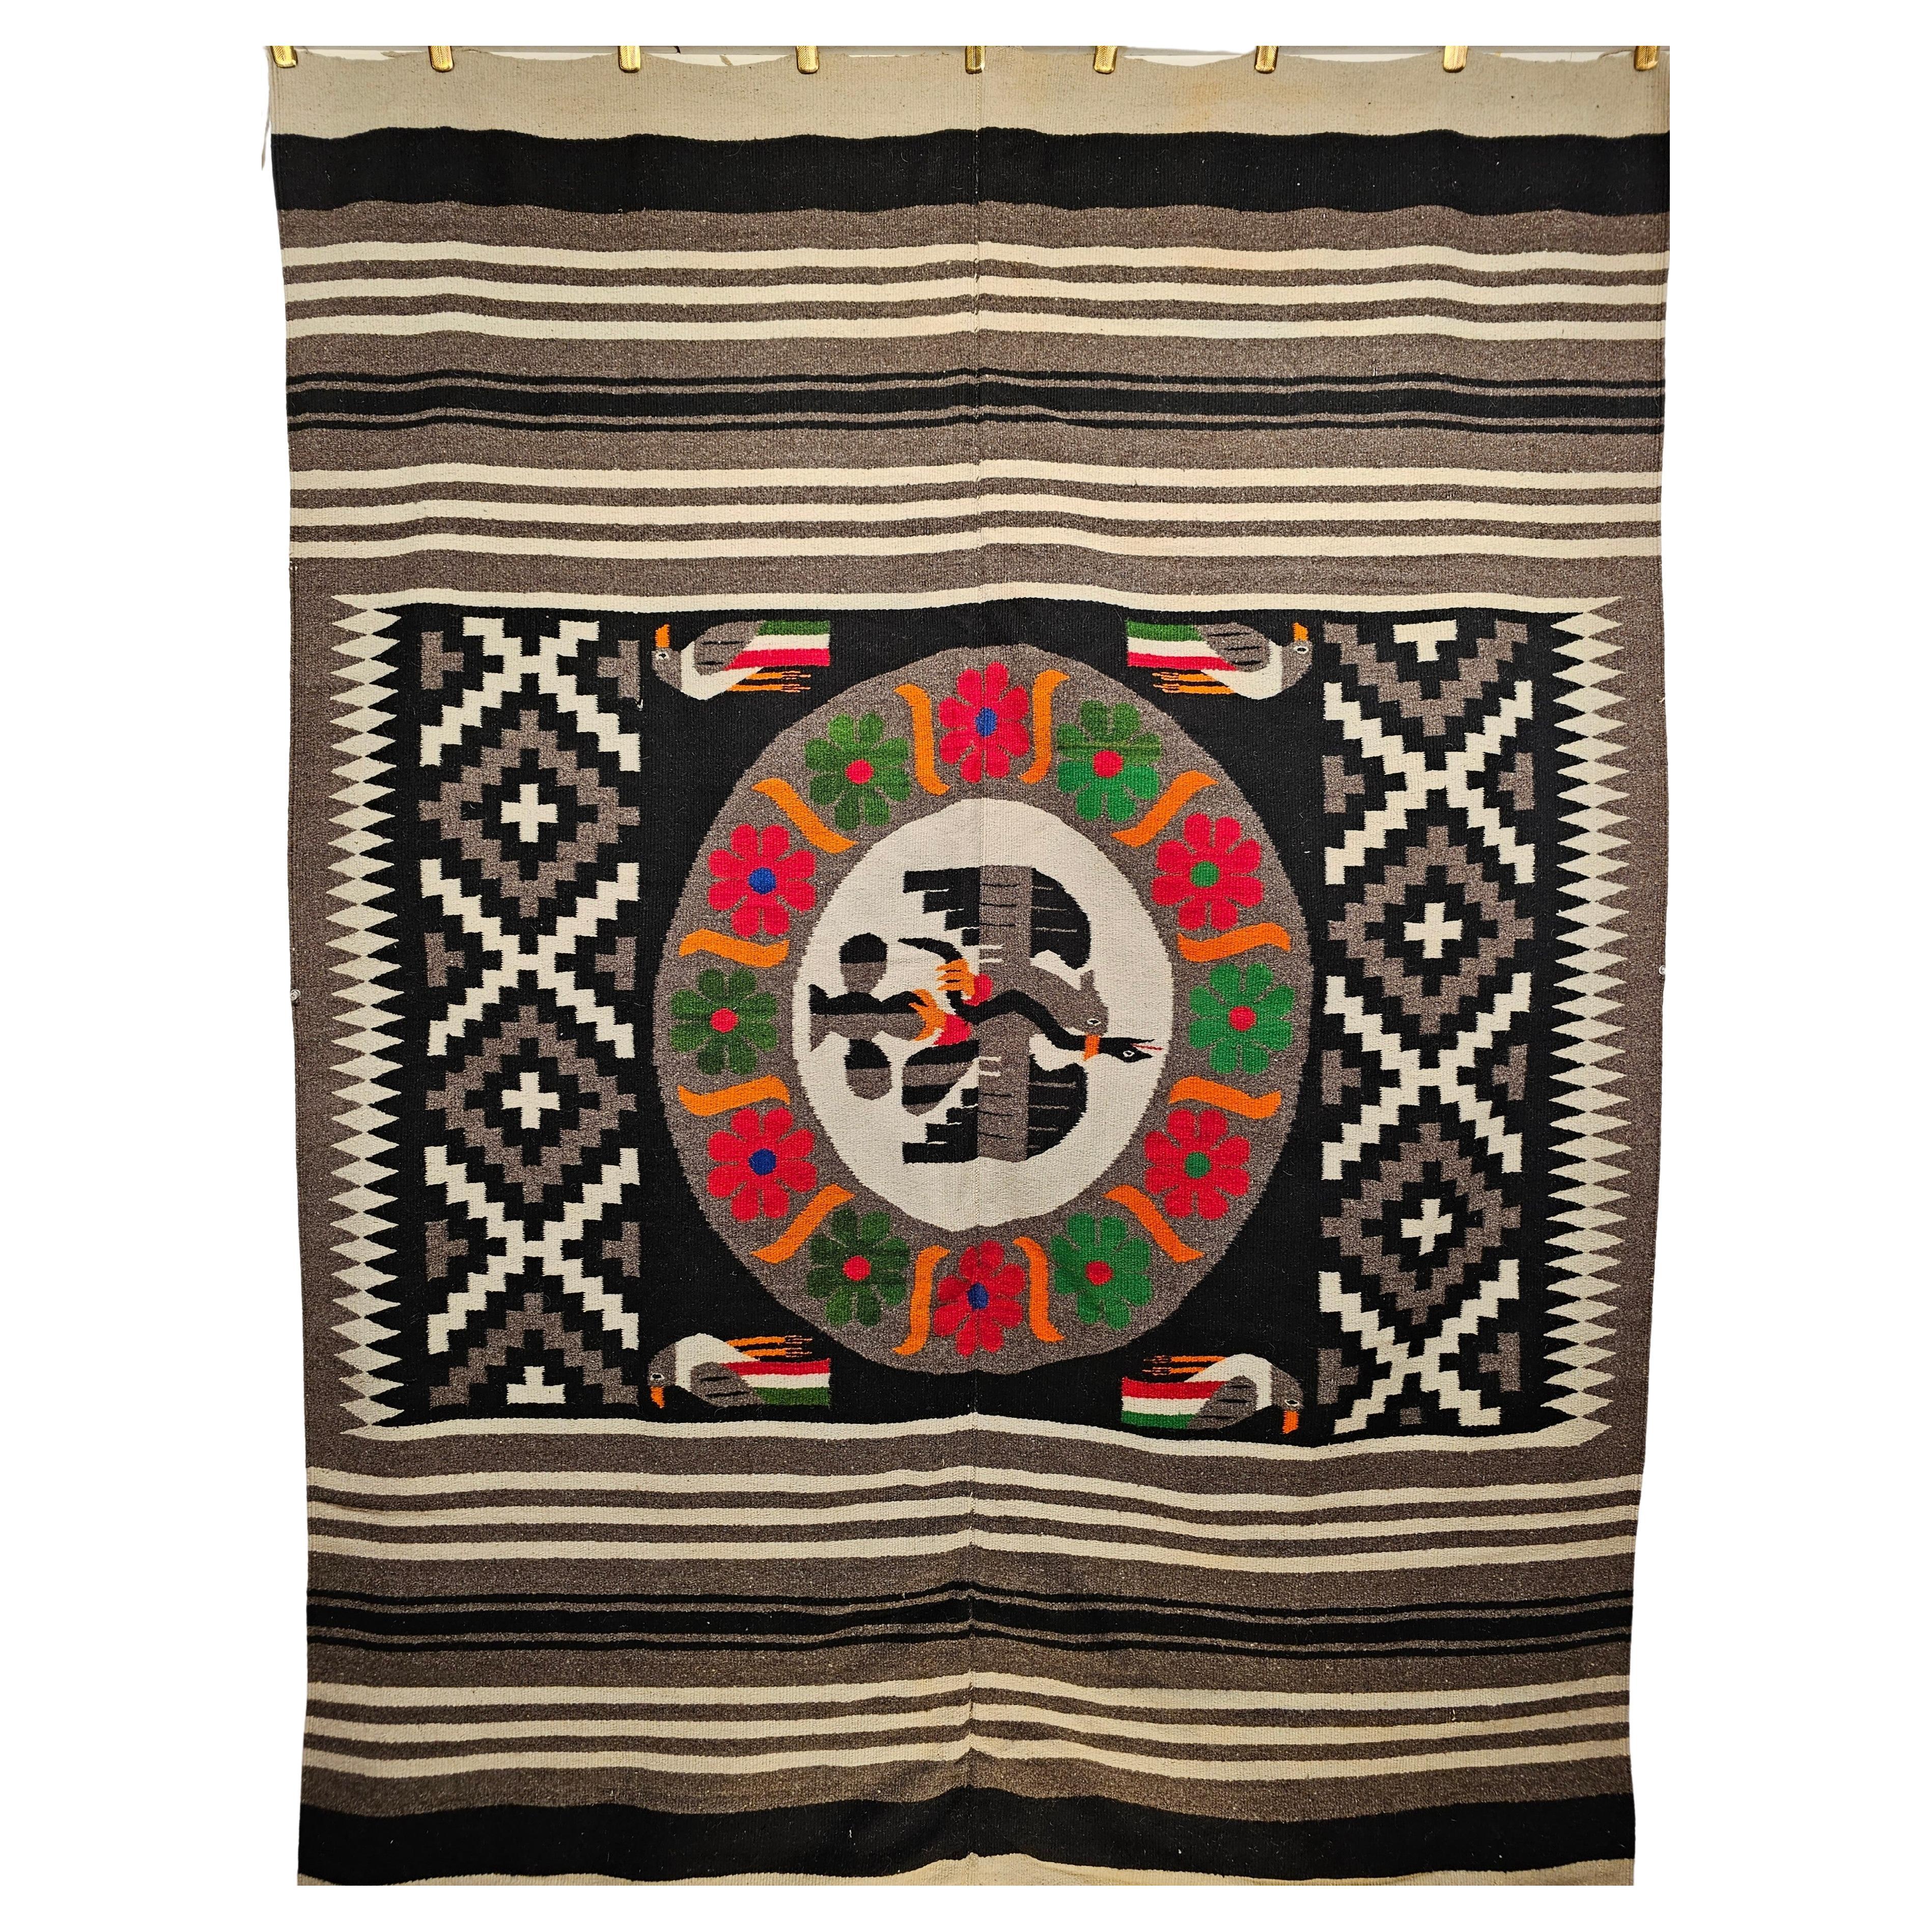 Vintage Mexican Serape Kilim Rug in Gray, Black and Ivory Colors